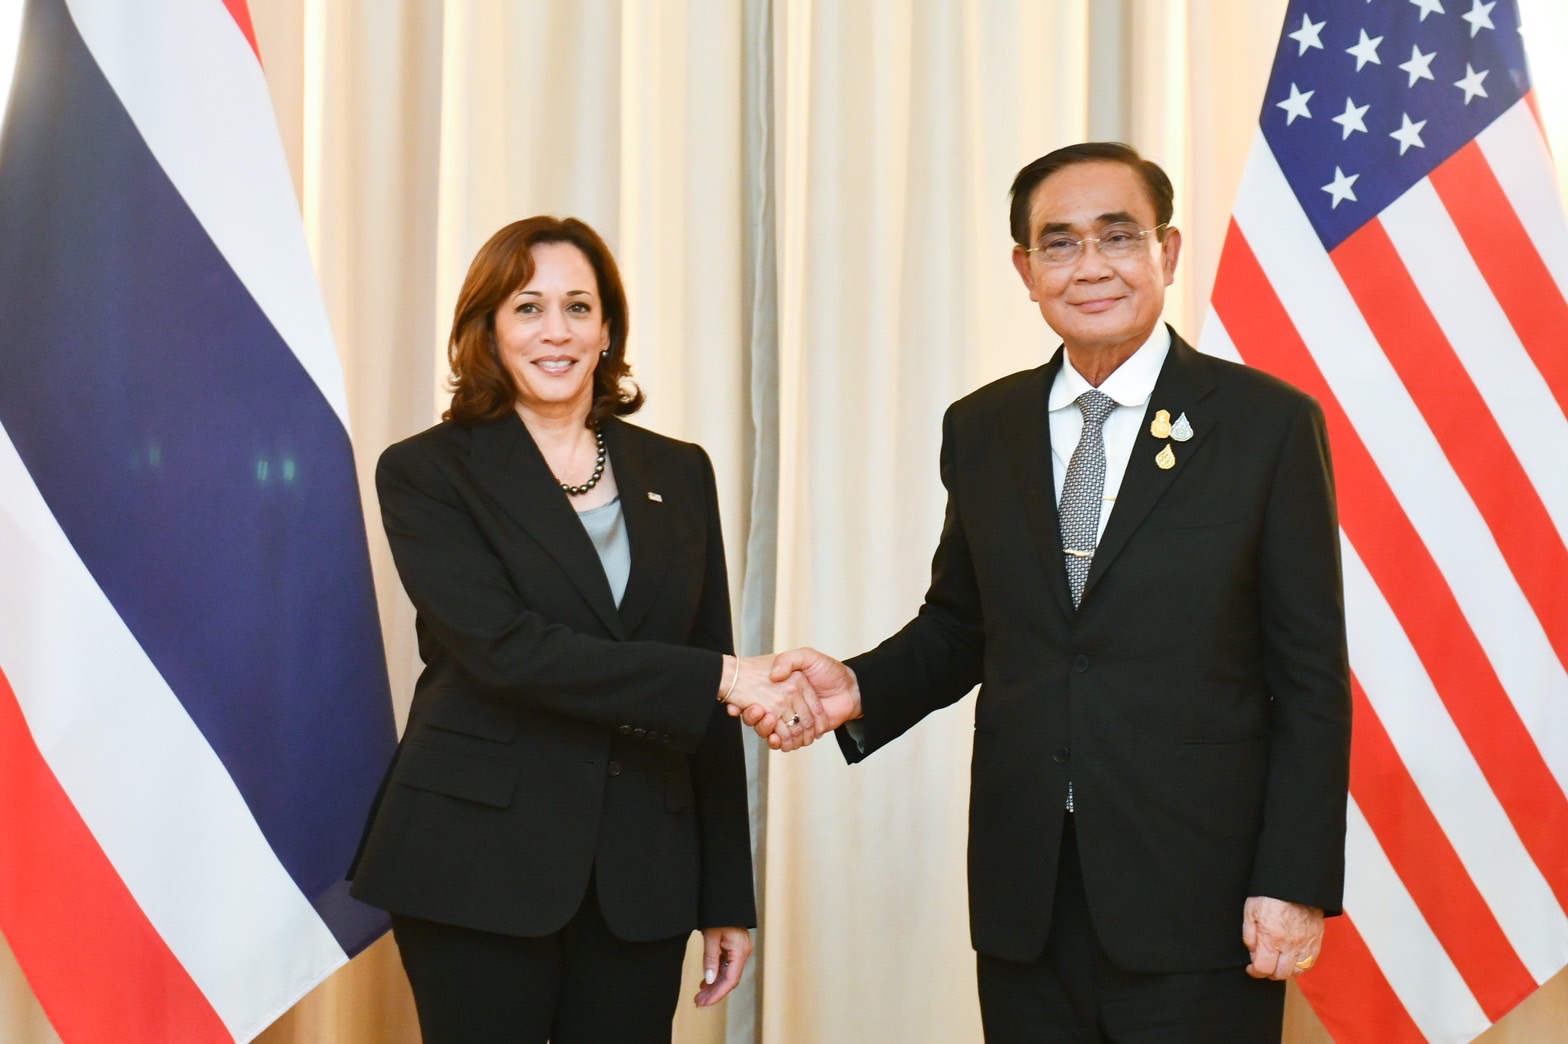 The Prime Minister of Thailand met with the Vice President of the